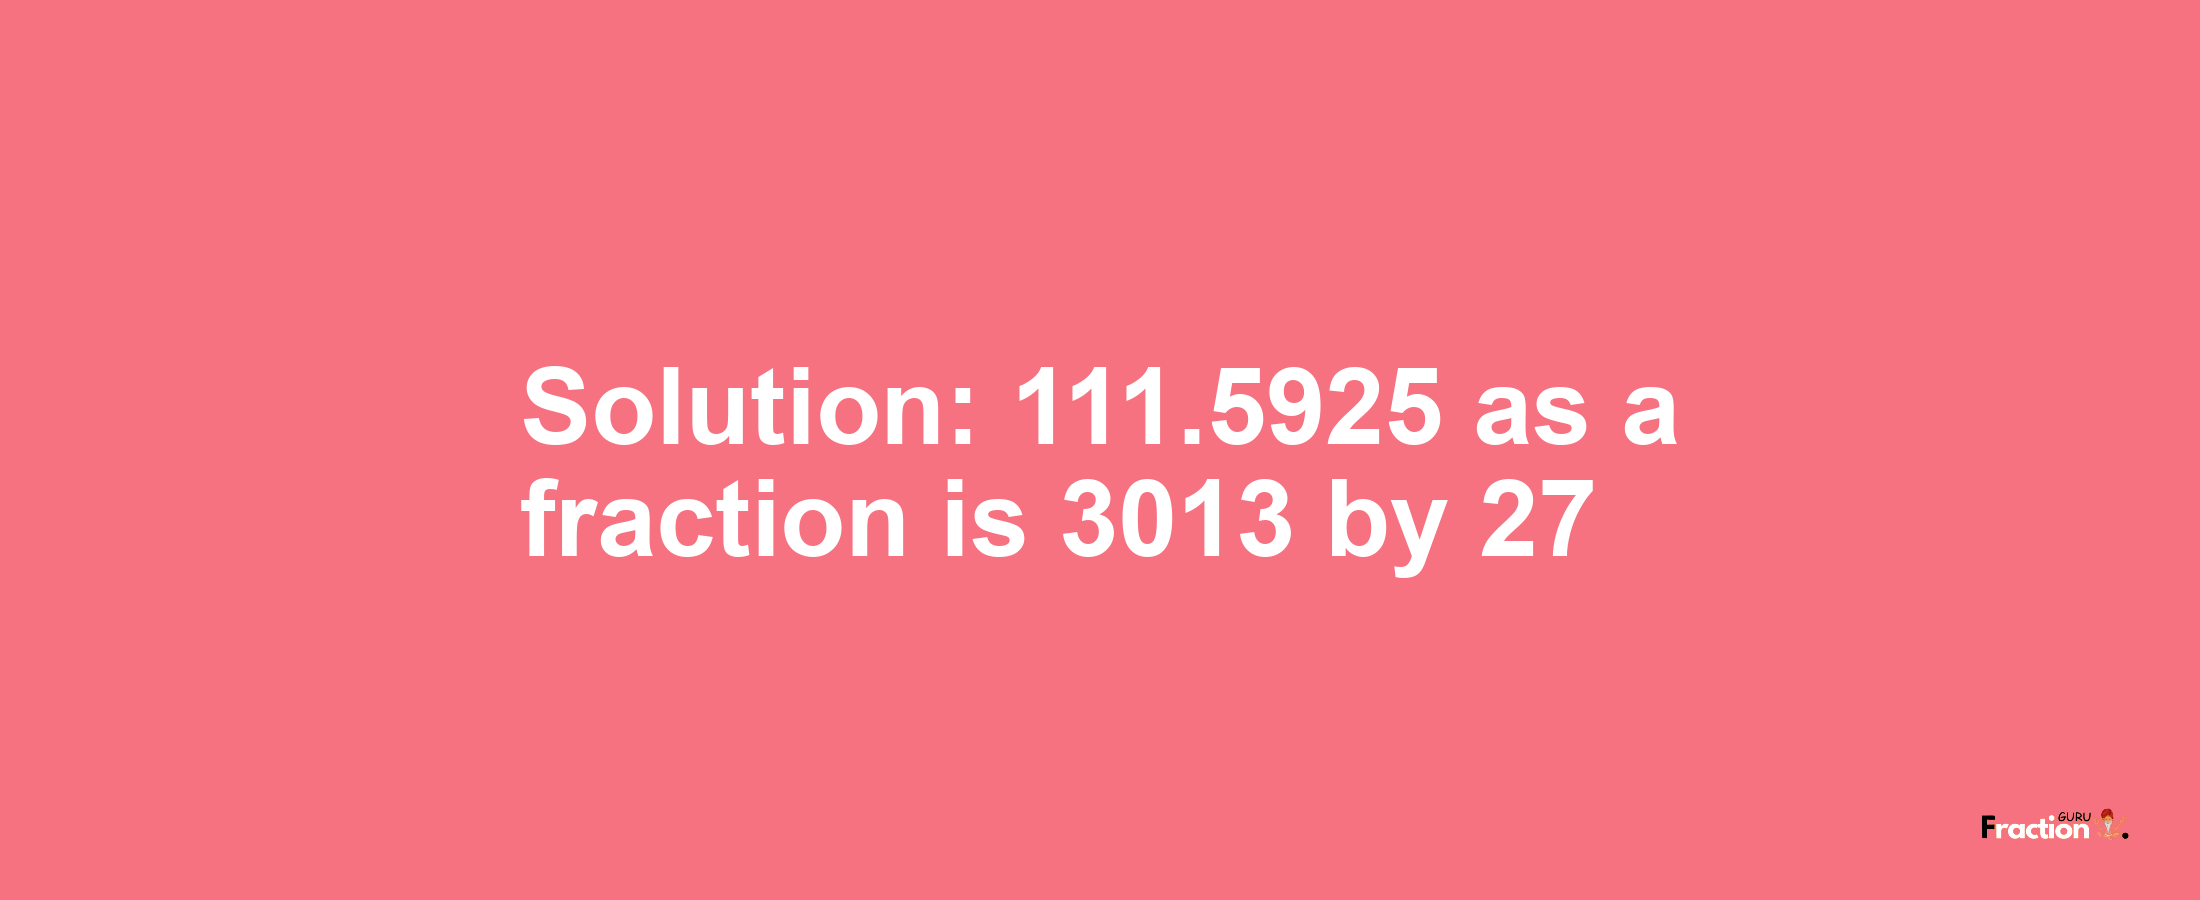 Solution:111.5925 as a fraction is 3013/27